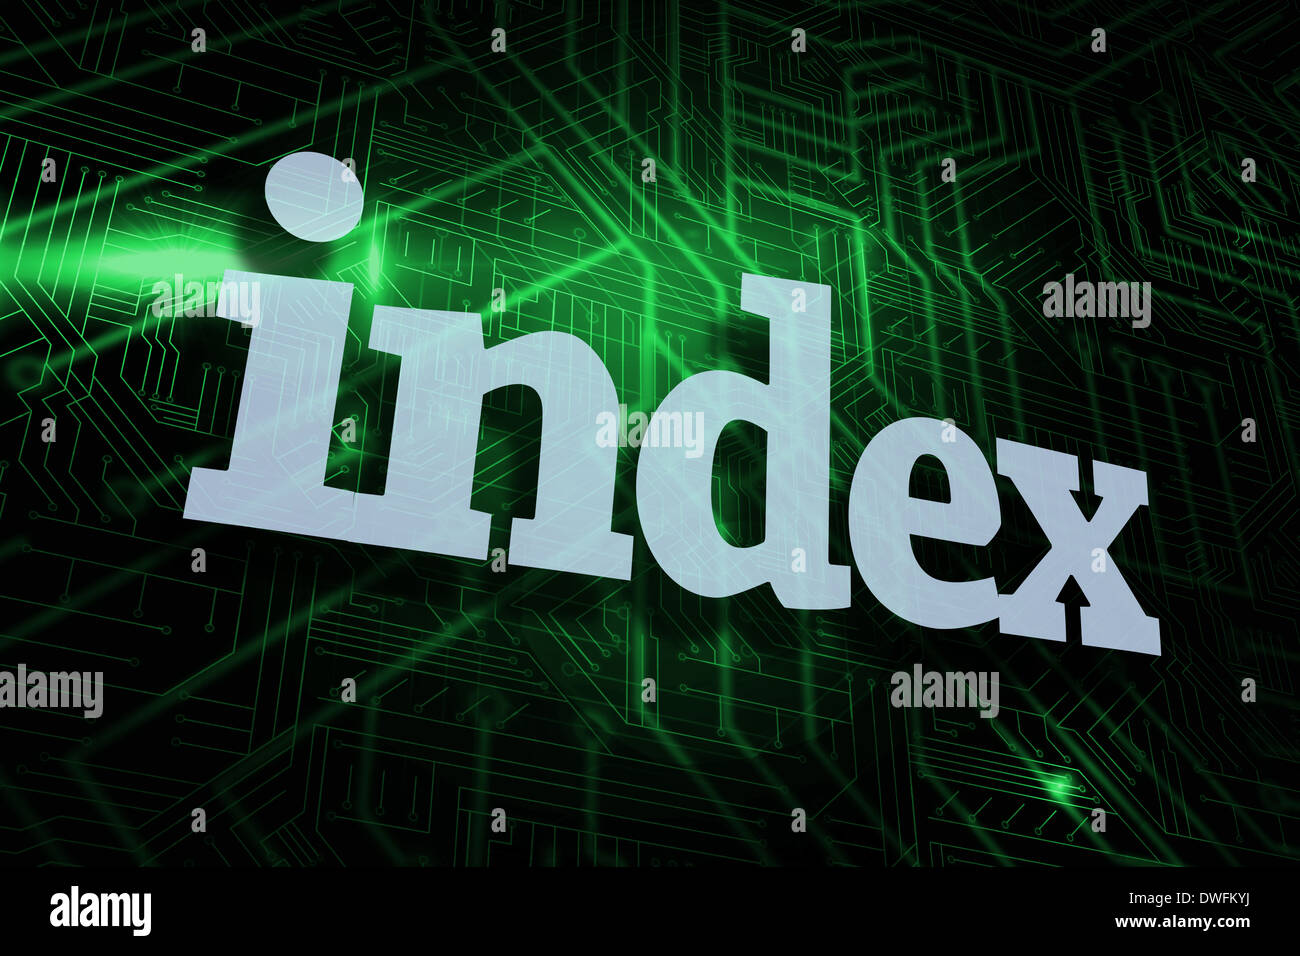 Index against green and black circuit board Stock Photo